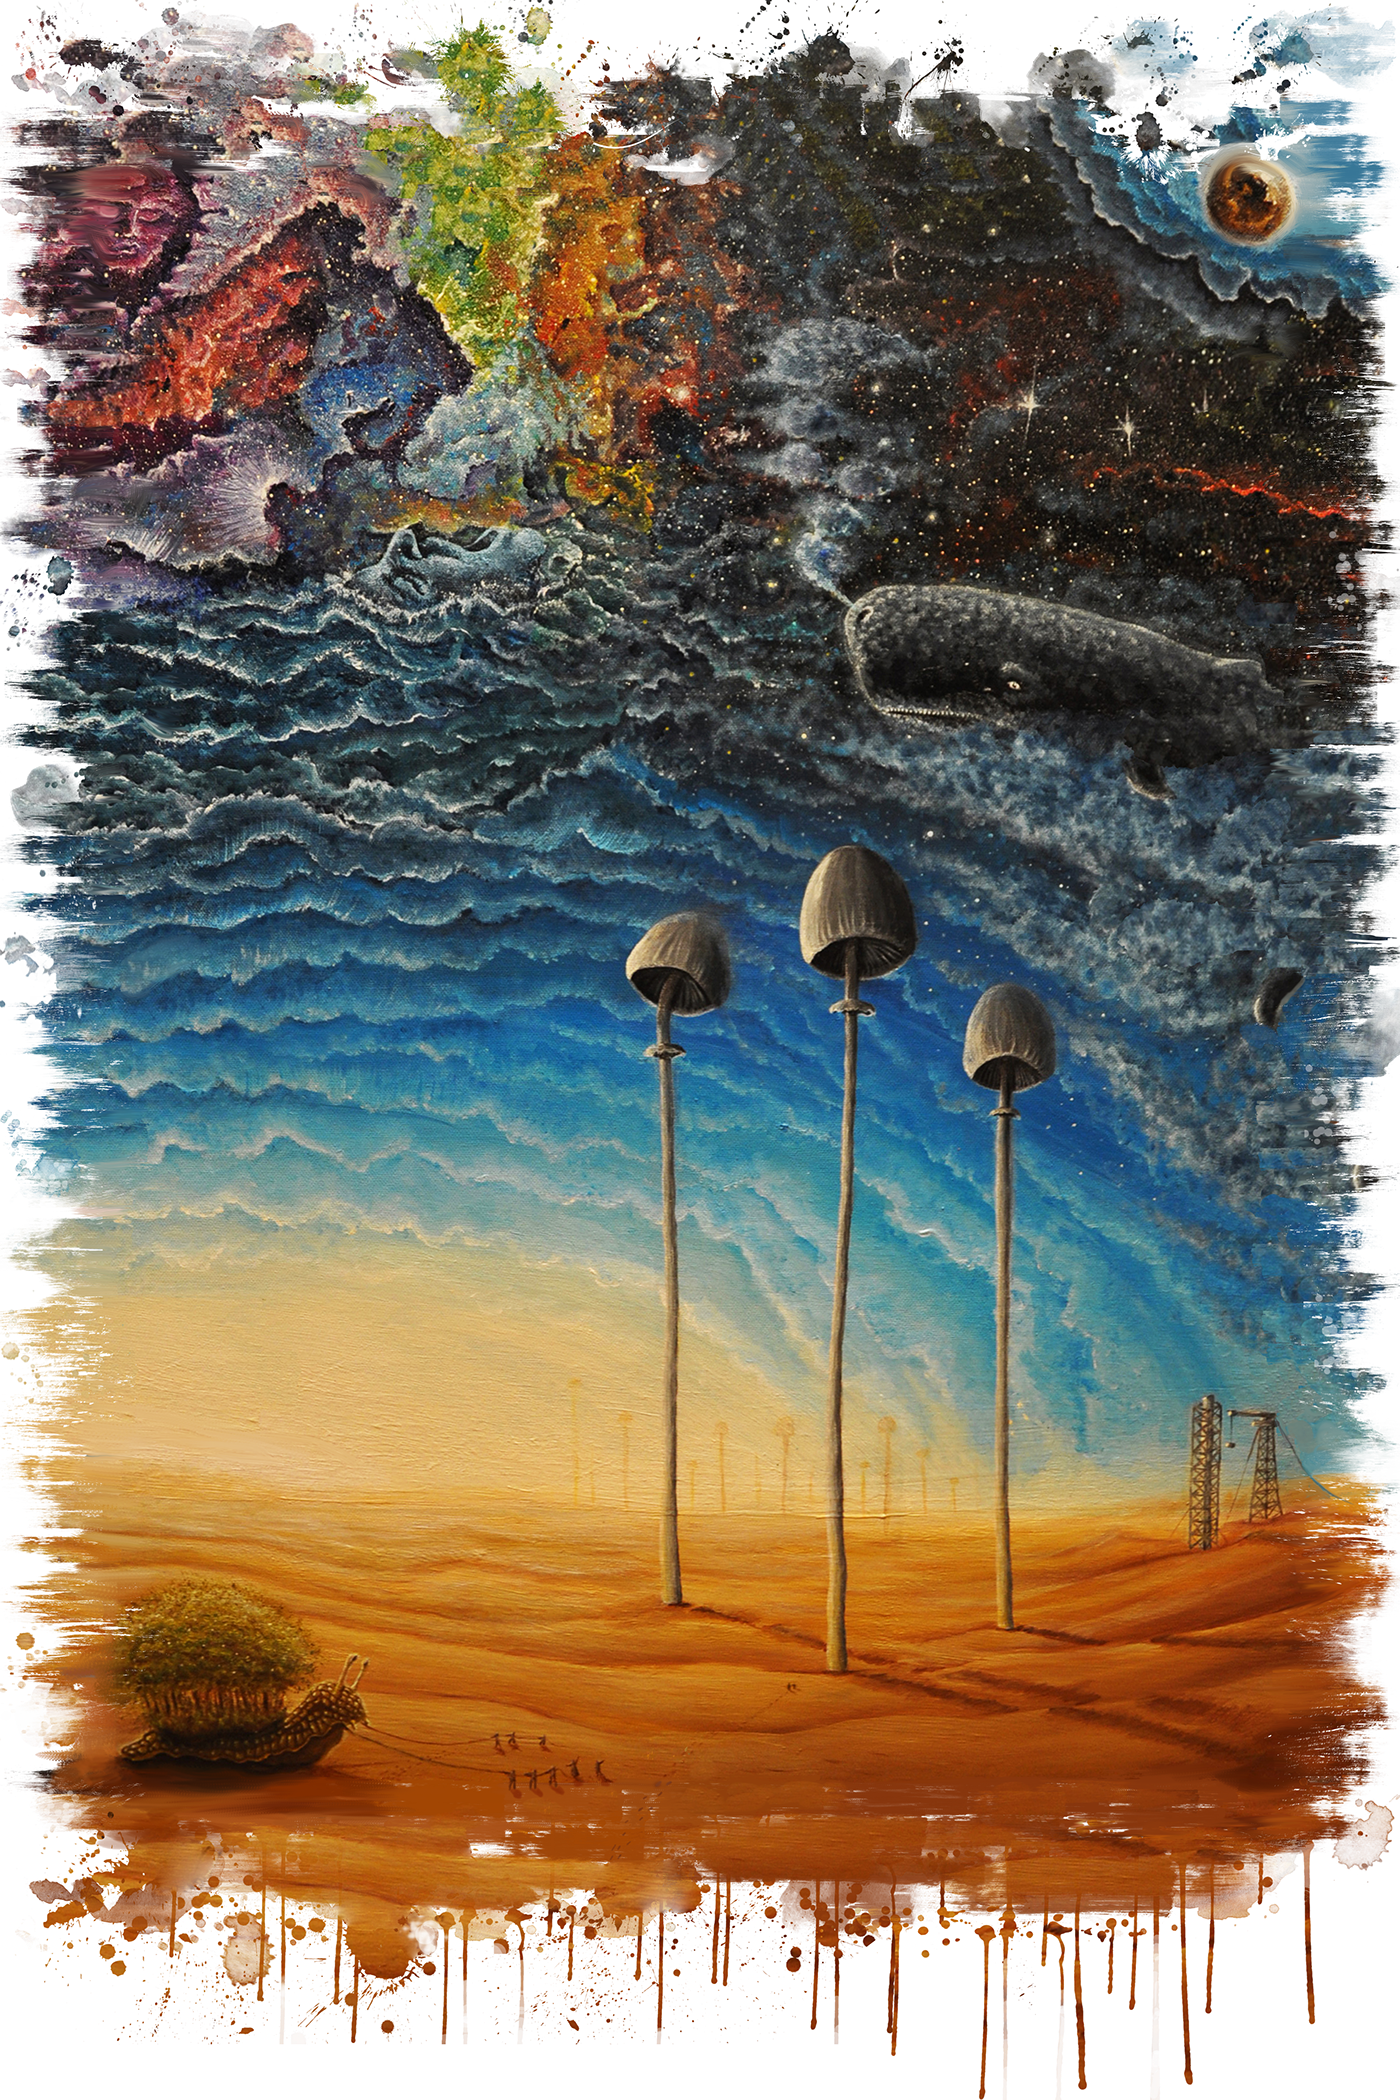 Whale desert Mushrooms snail Space  planet universe clouds psy surreal abstract #madethis  #PassportToCreativity #MadeThis #PassportToCreativity